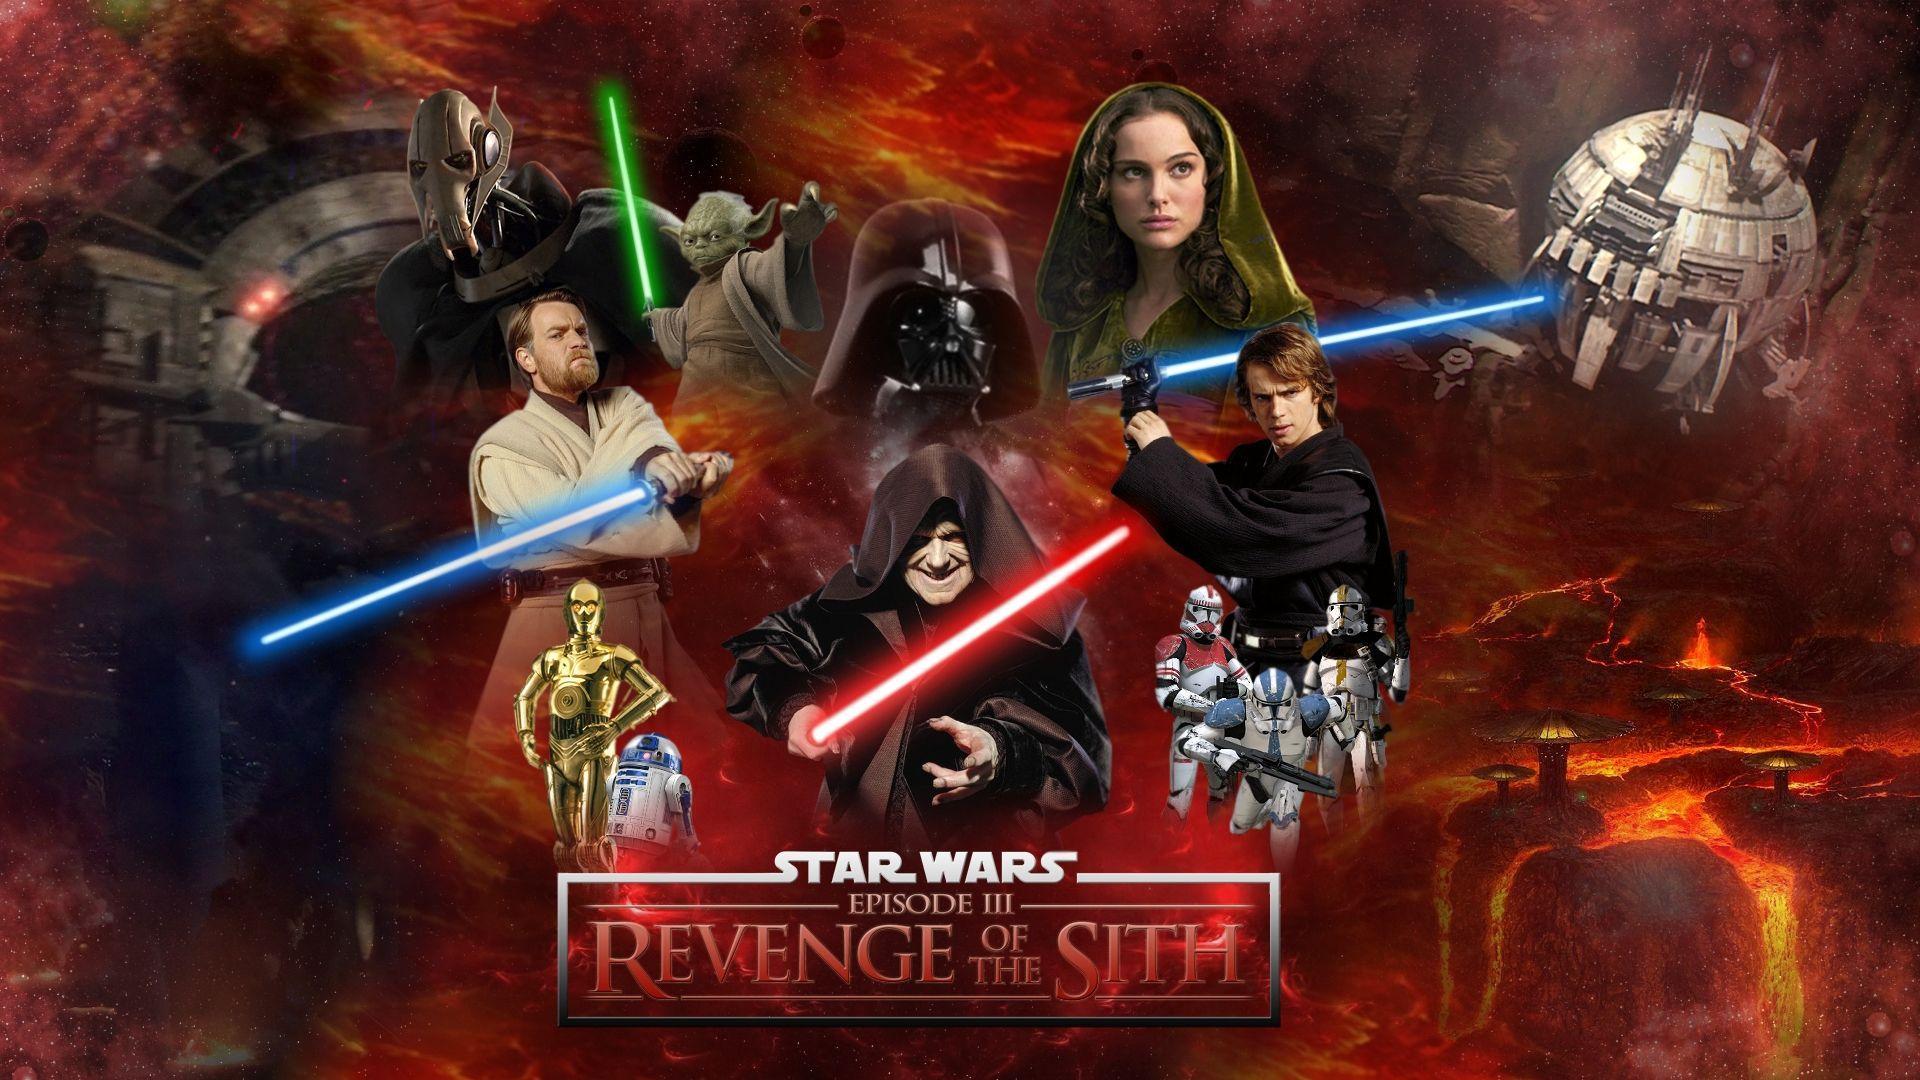 Star Wars Episode Iii Revenge Of The Sith Wallpapers Top Free Star